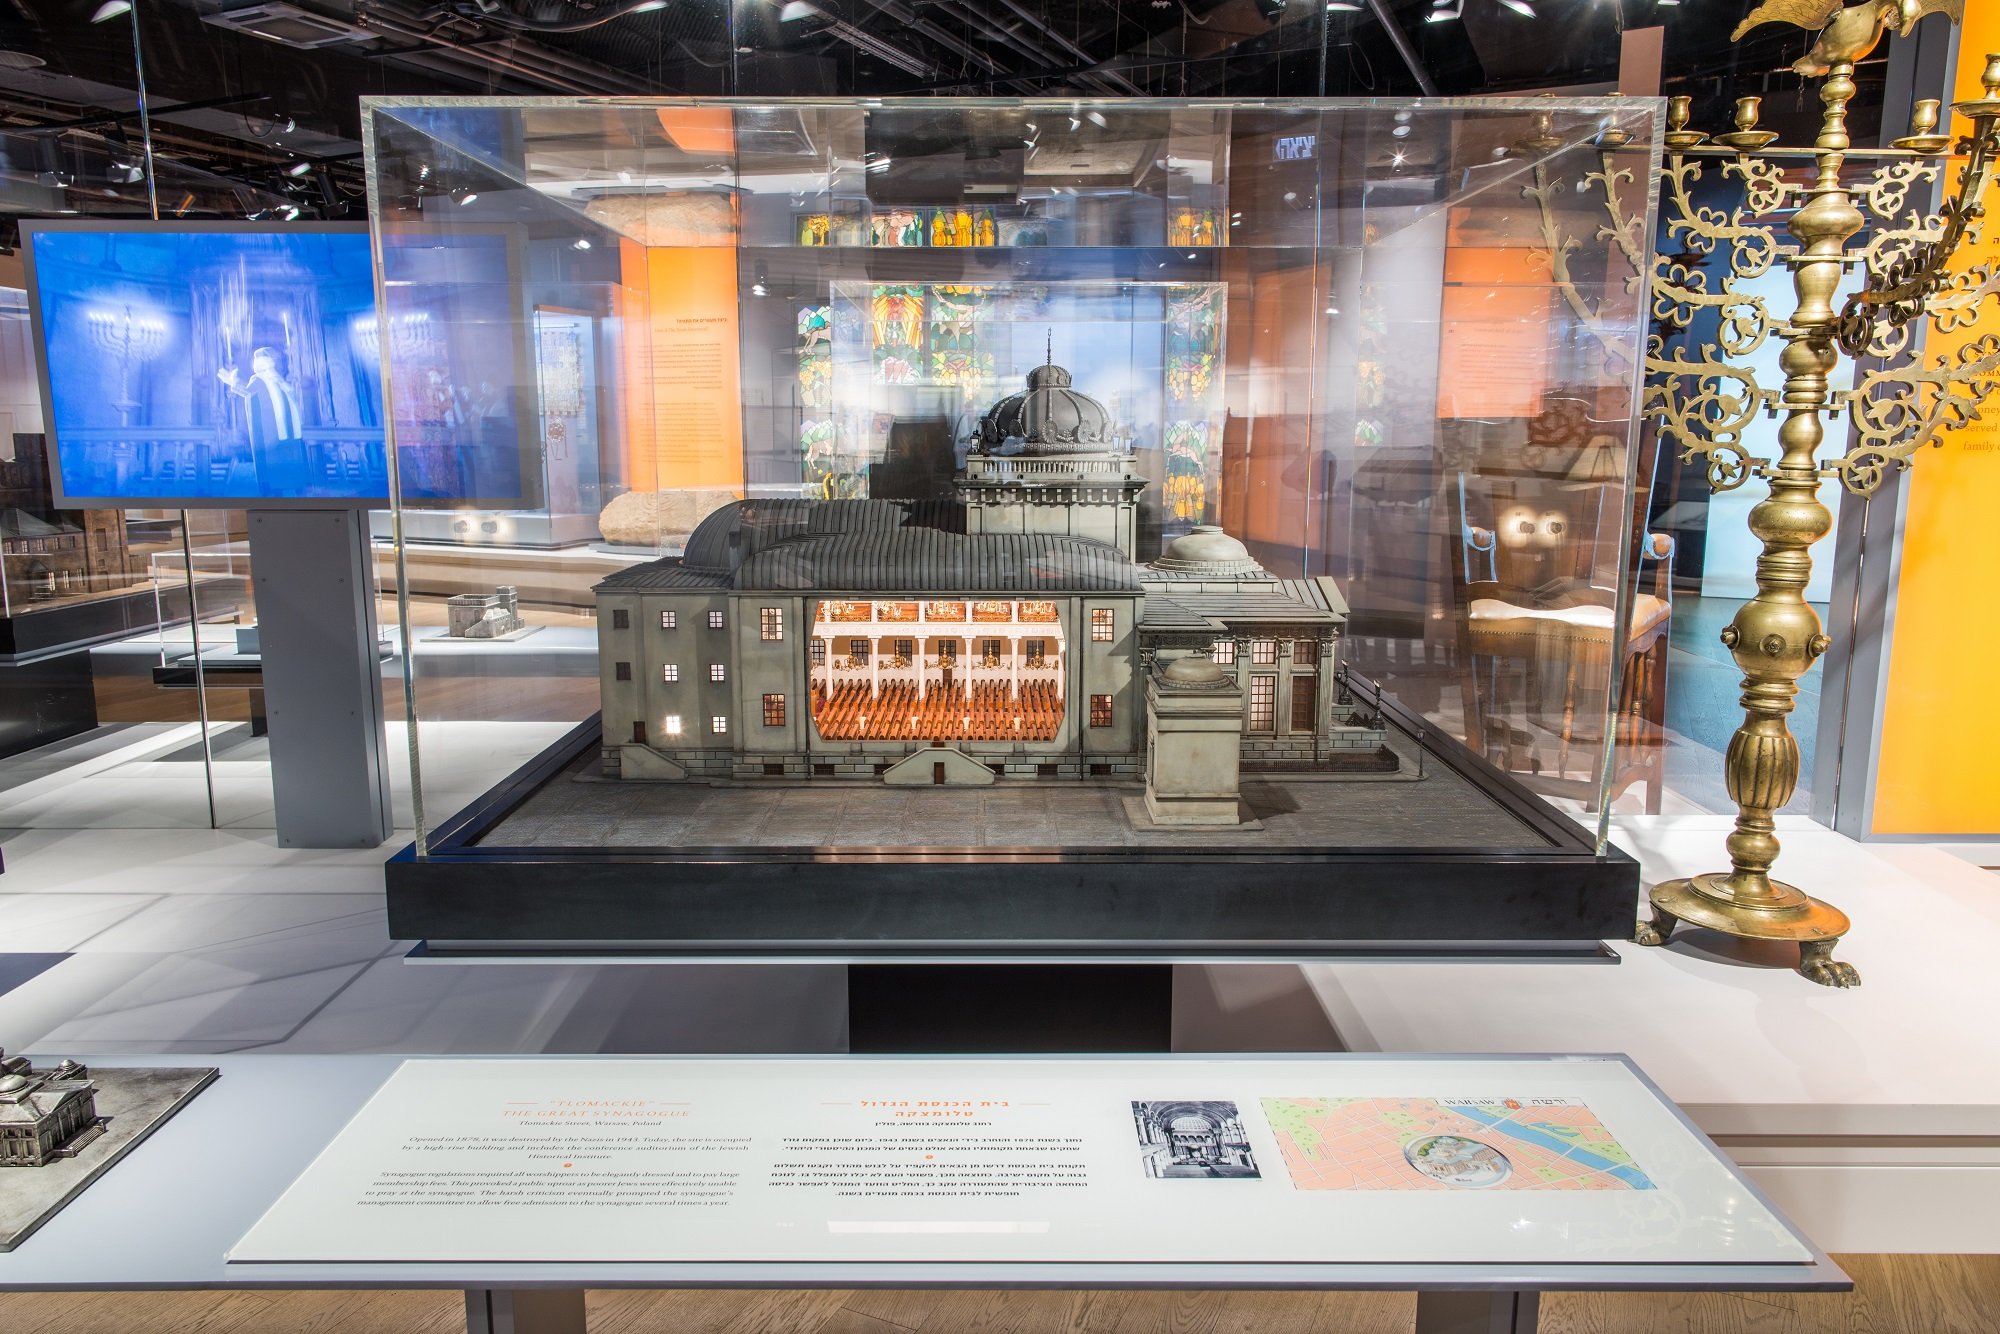 A model of the synagogue in Warsaw Poland. ANU – Museum of the Jewish People, The Synagogue Hall